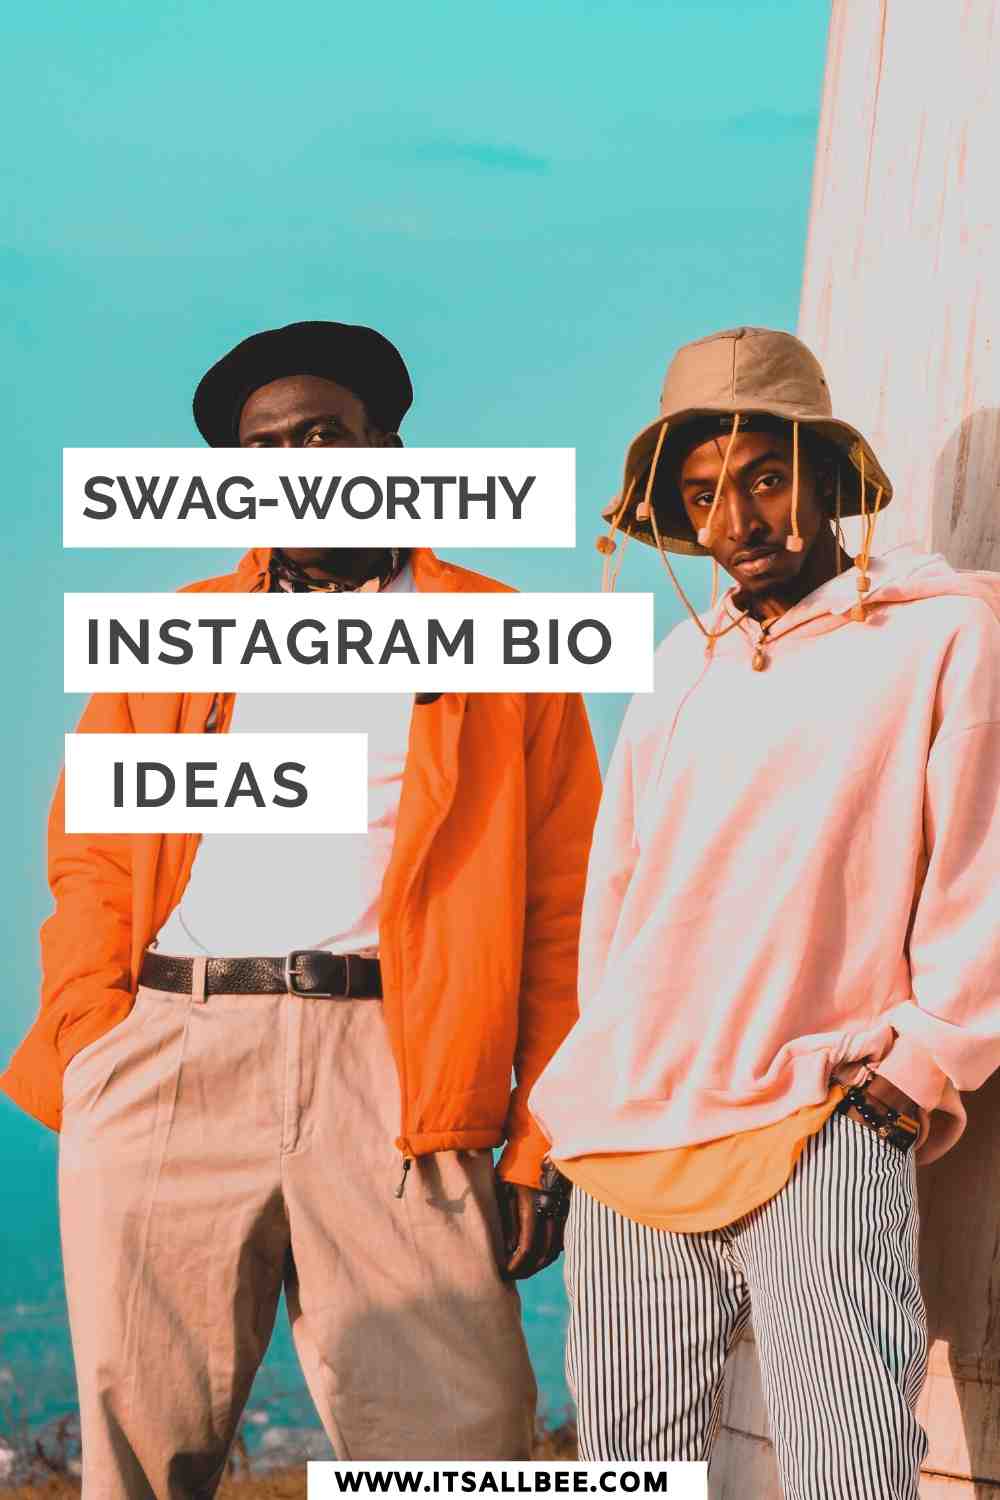 Guide to cool ideas for Instagram bios for guys. Short, savage, funny and witty quotes and captions for profile